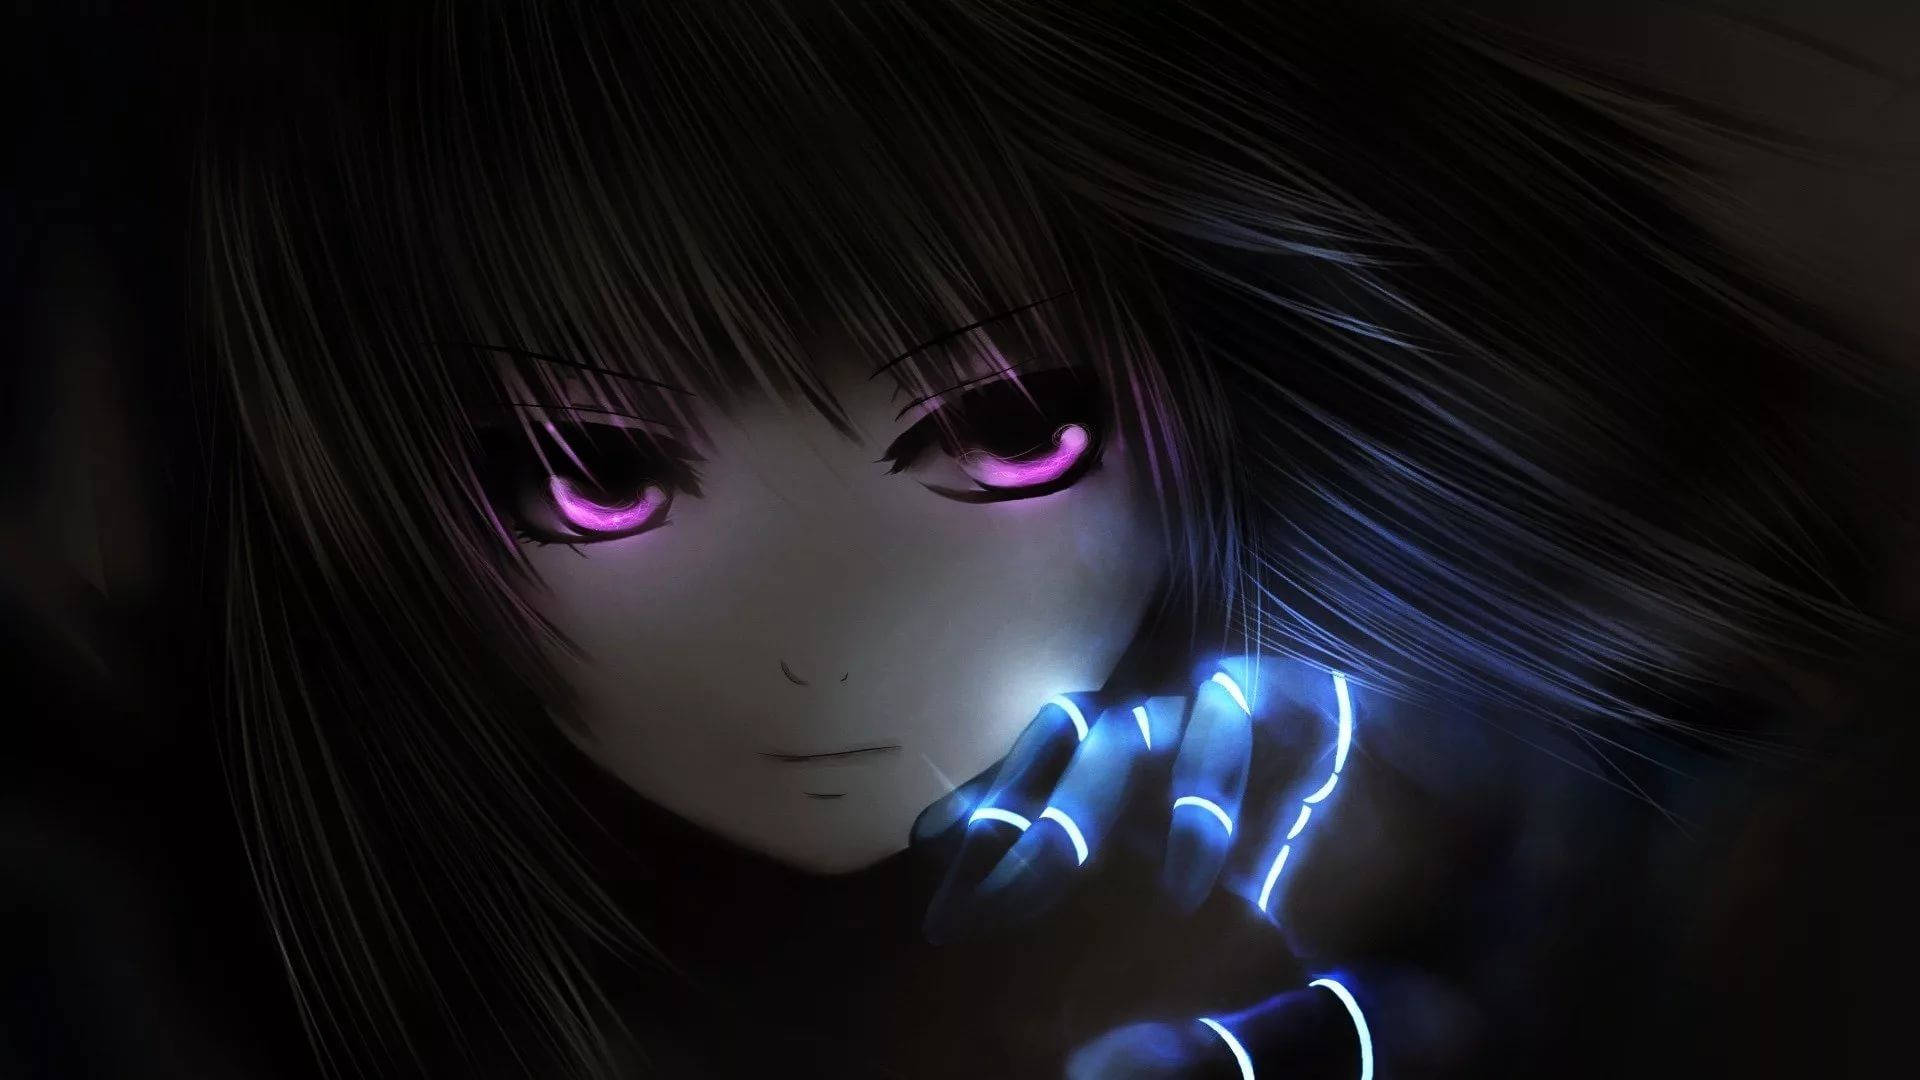 Black Anime 1920X1080 Wallpaper and Background Image